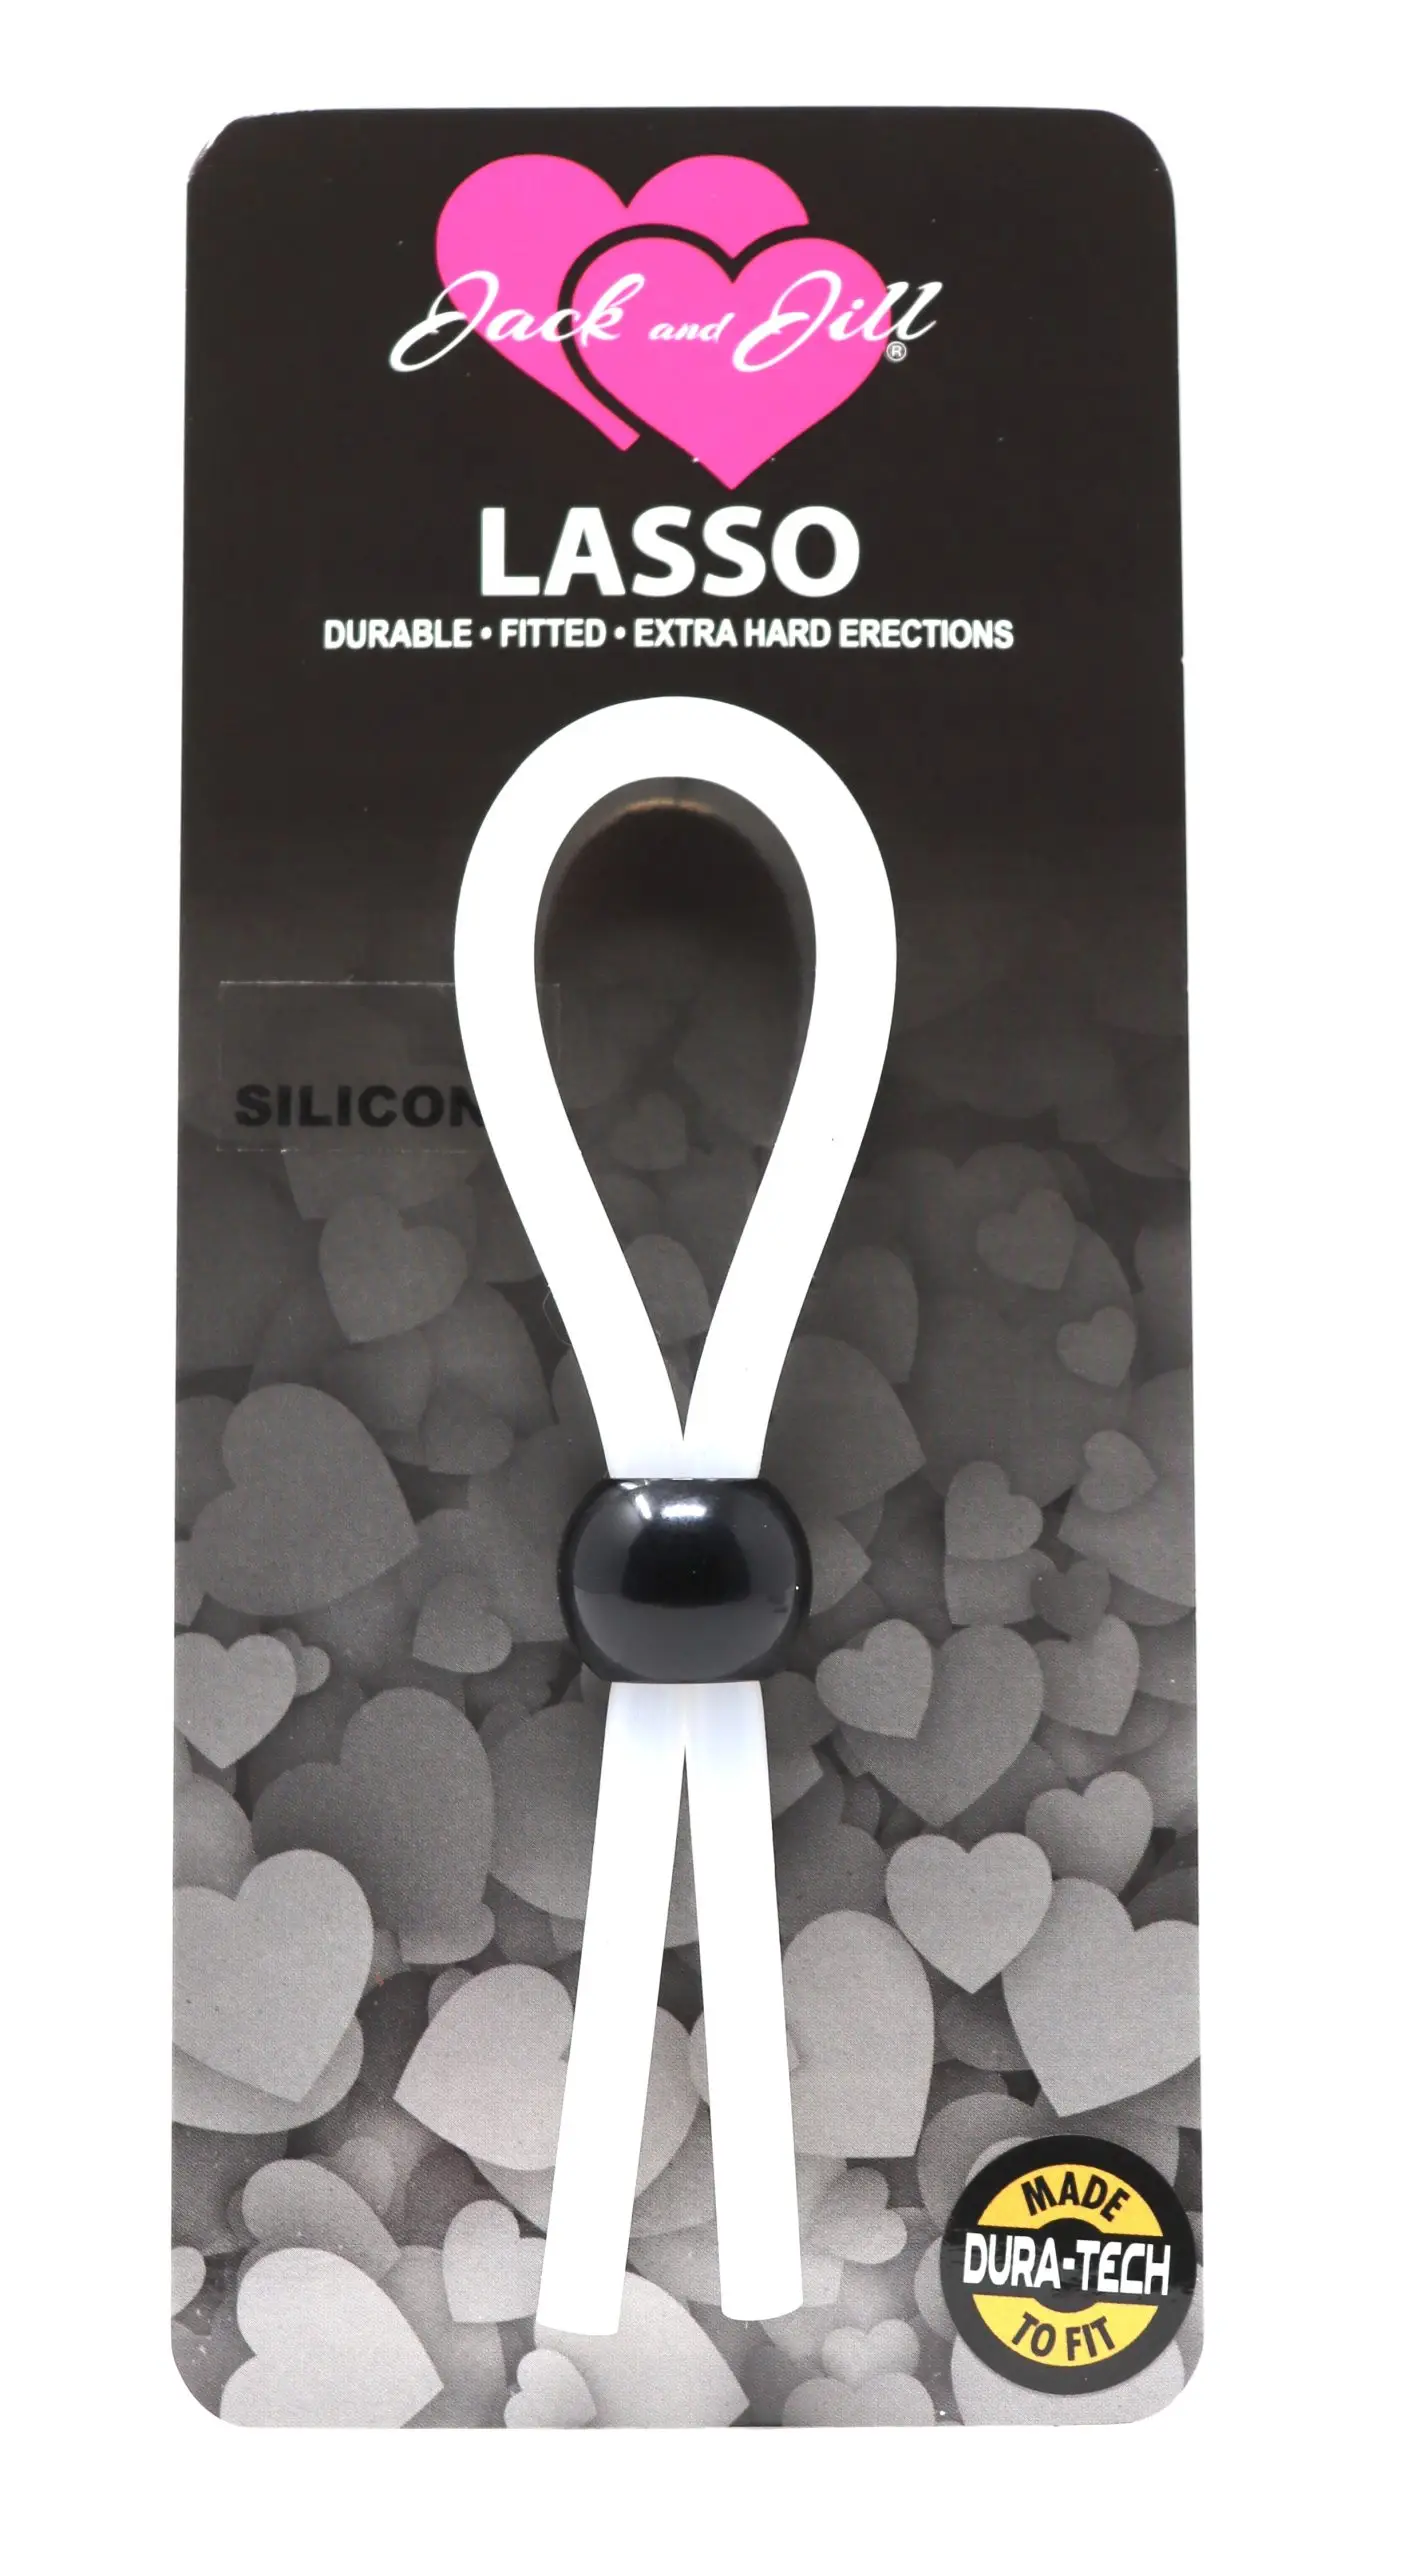 Jack and Jill Lasso Single Lock (Adjustable) Translucent Silicone cock ring